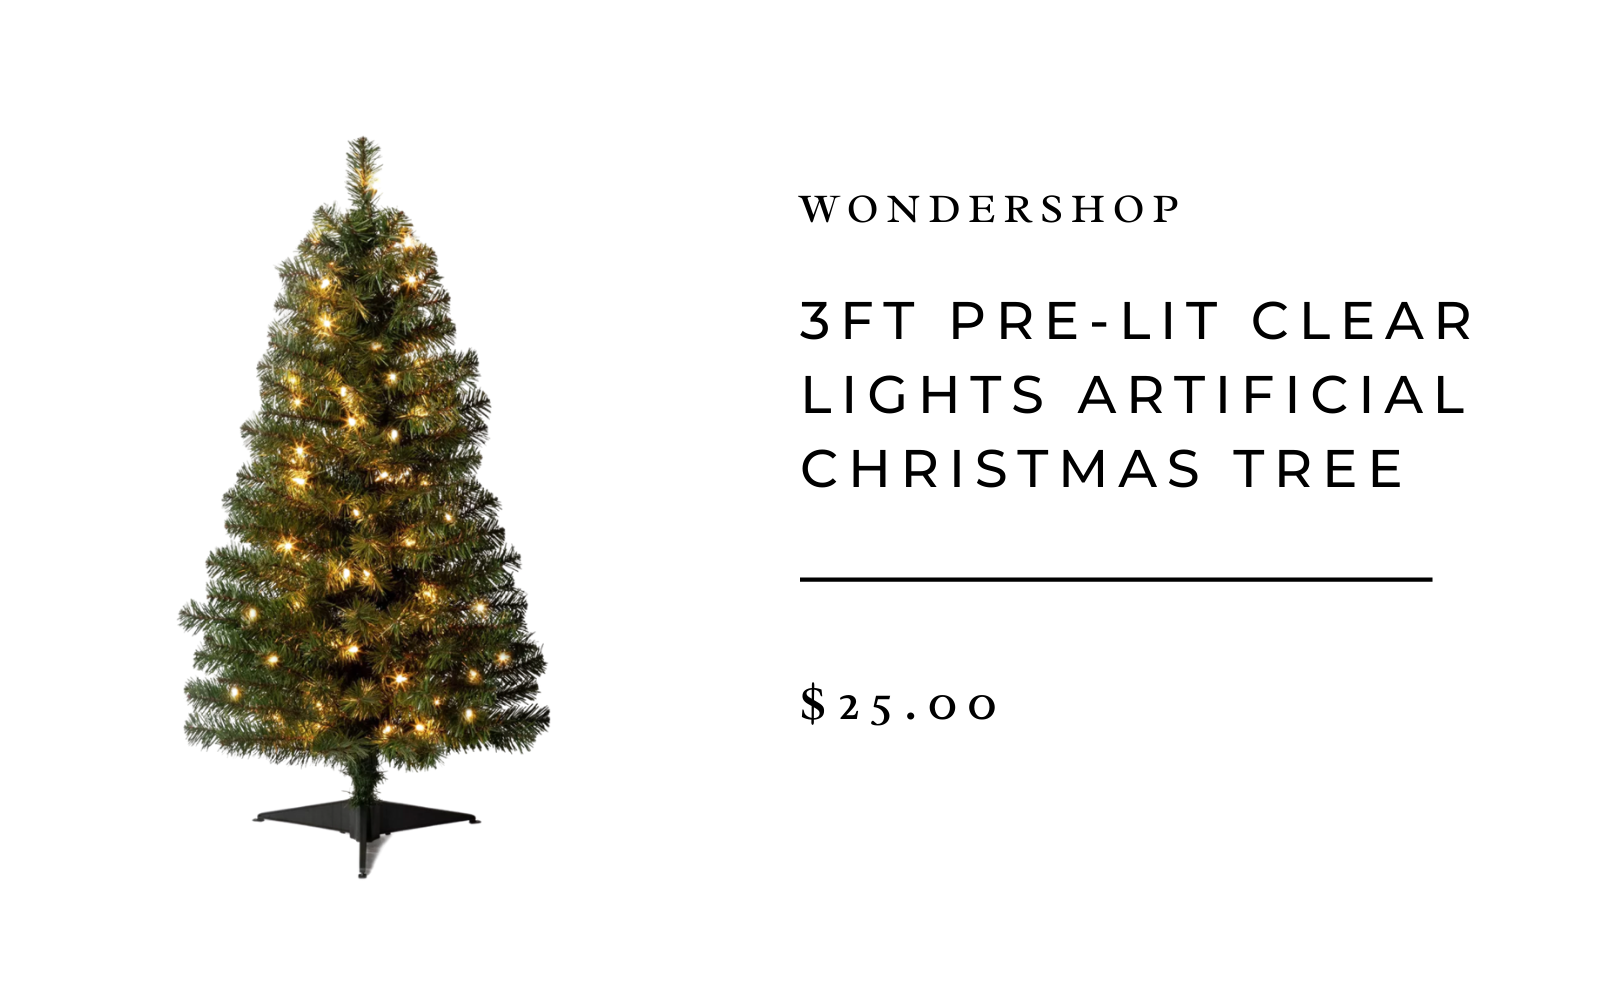 3ft Pre-Lit Clear Lights Artificial Christmas Tree